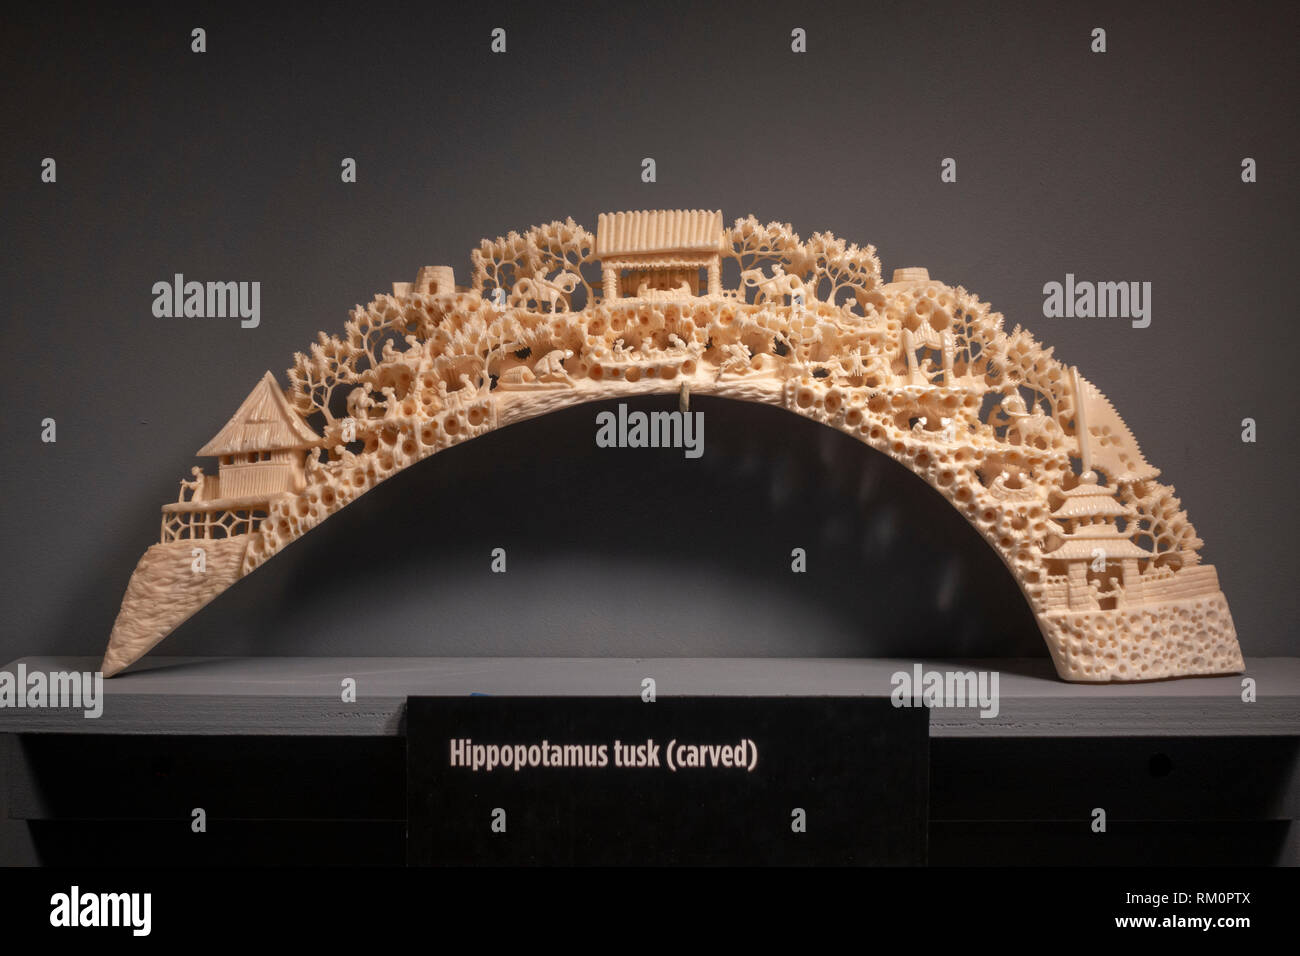 A carved hippopotamus tusk, part of the illegal wildlife trade carried out by the Mob, The Mob Museum, Las Vegas, Nevada, United States. Stock Photo